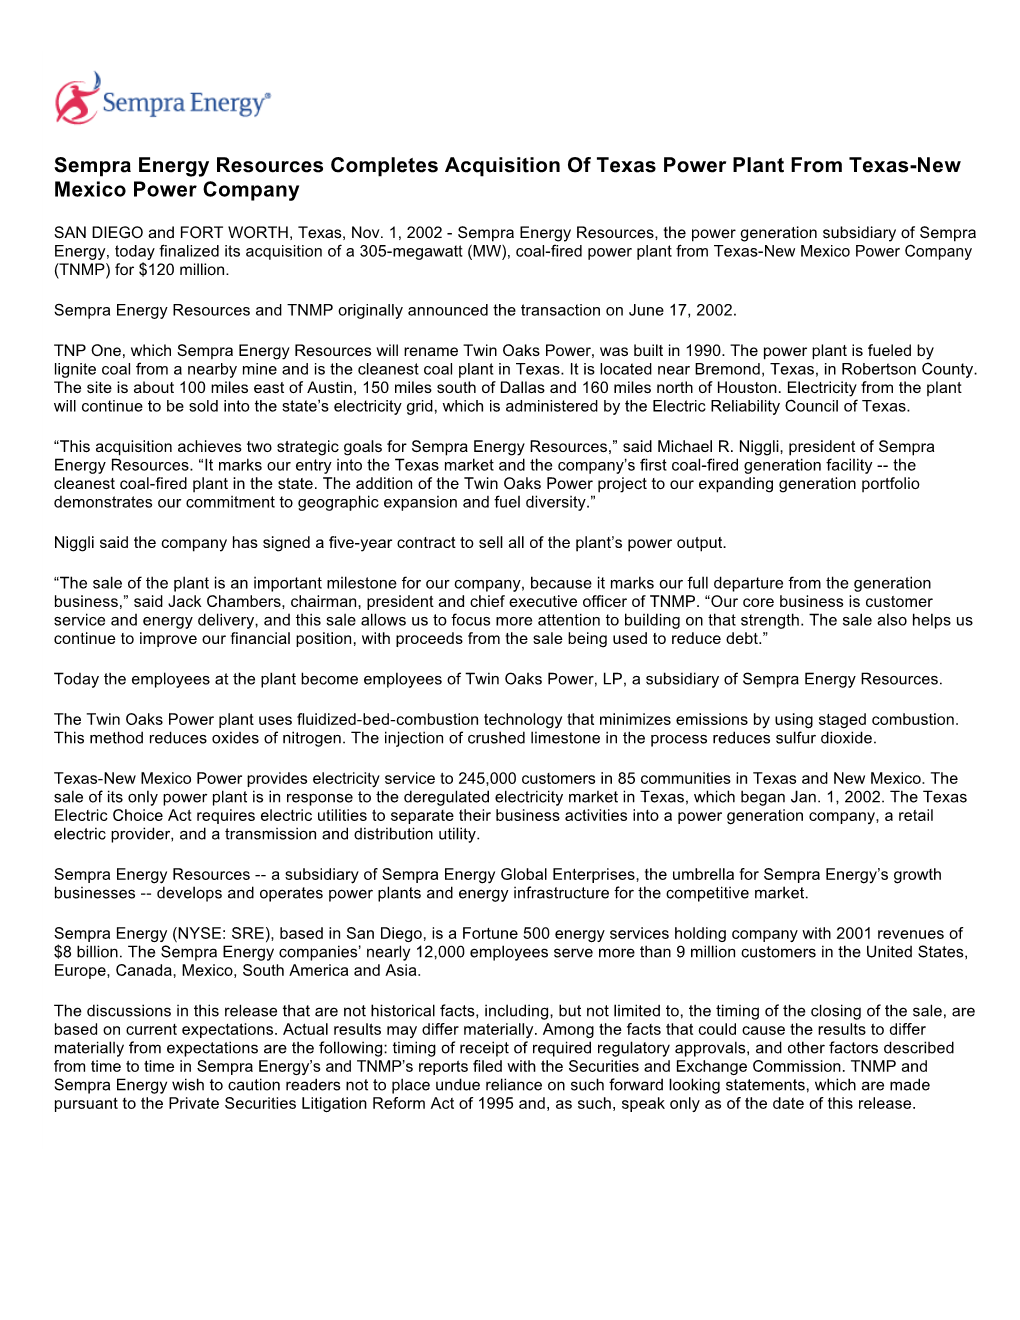 Sempra Energy Resources Completes Acquisition of Texas Power Plant from Texas-New Mexico Power Company